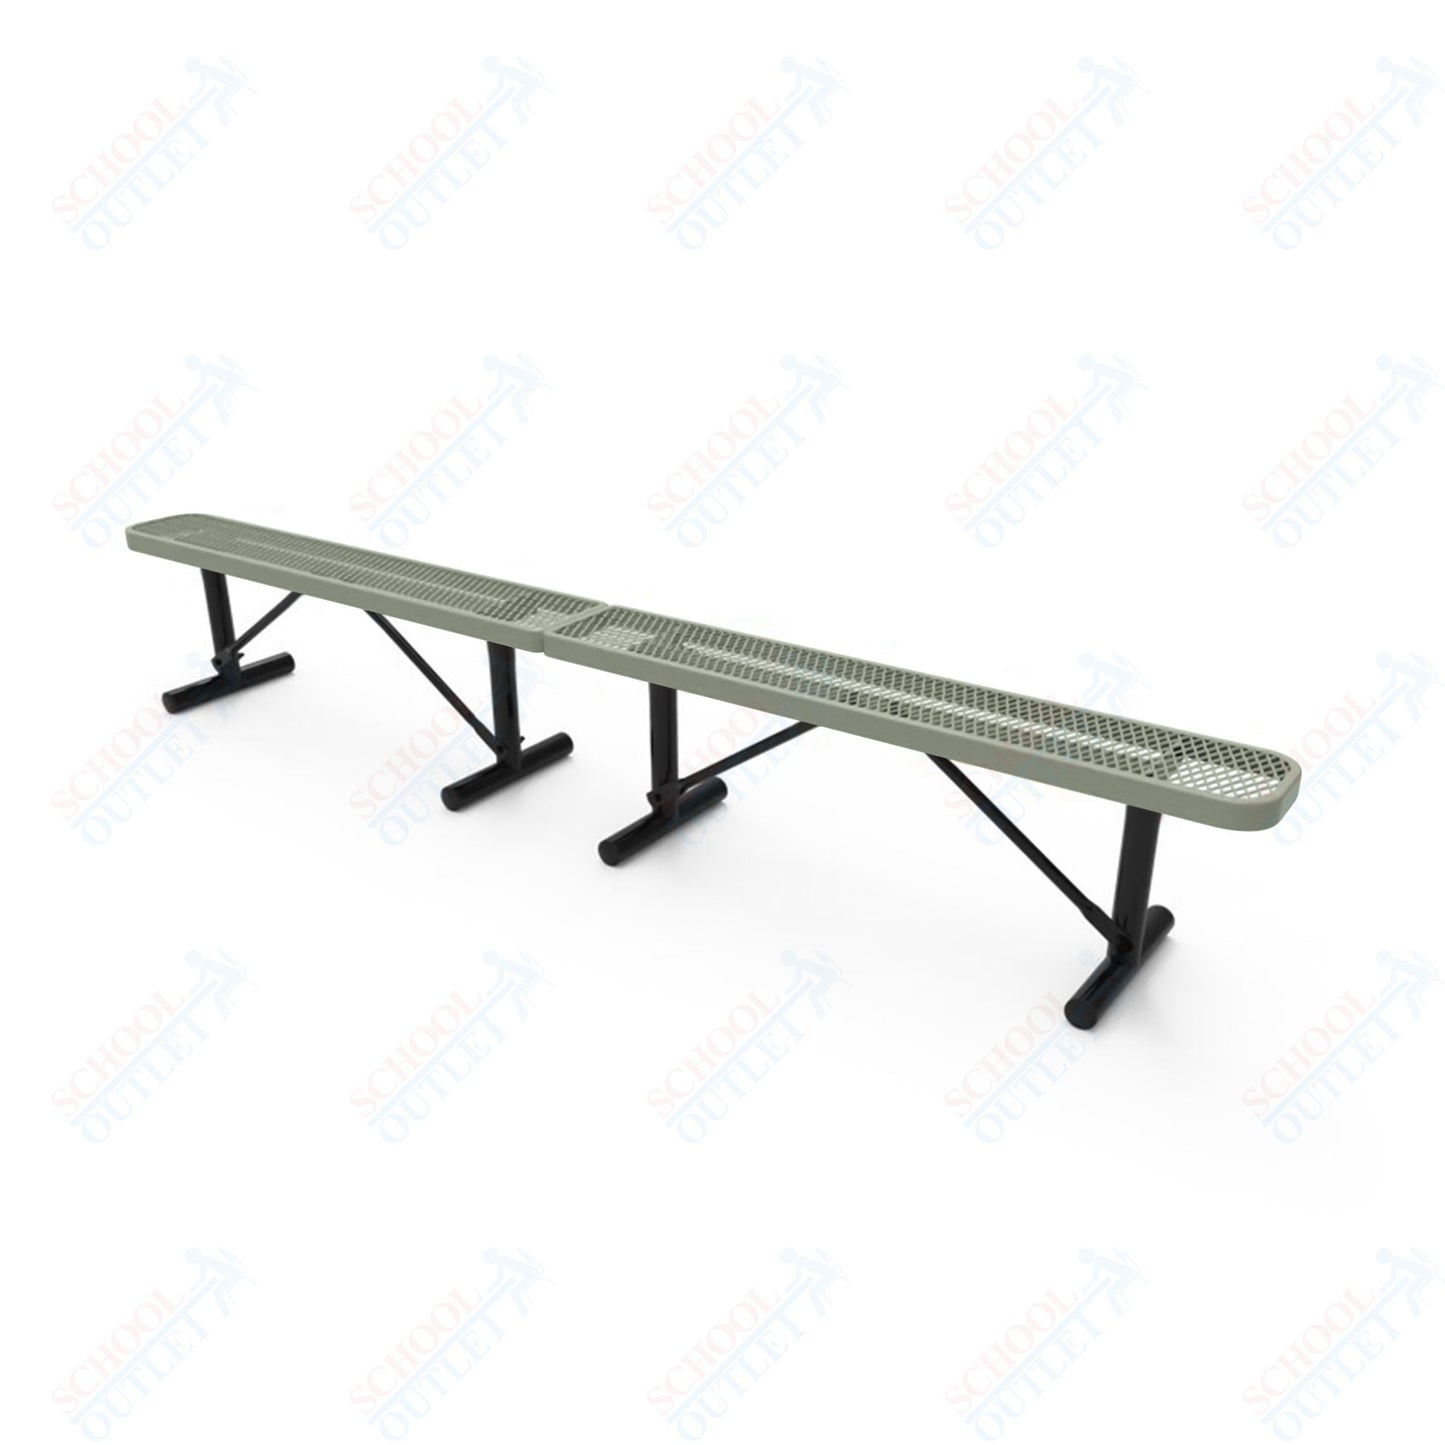 MyTcoat - Standard Portable Outdoor Bench with Back 10' L (MYT-BRT10-21)